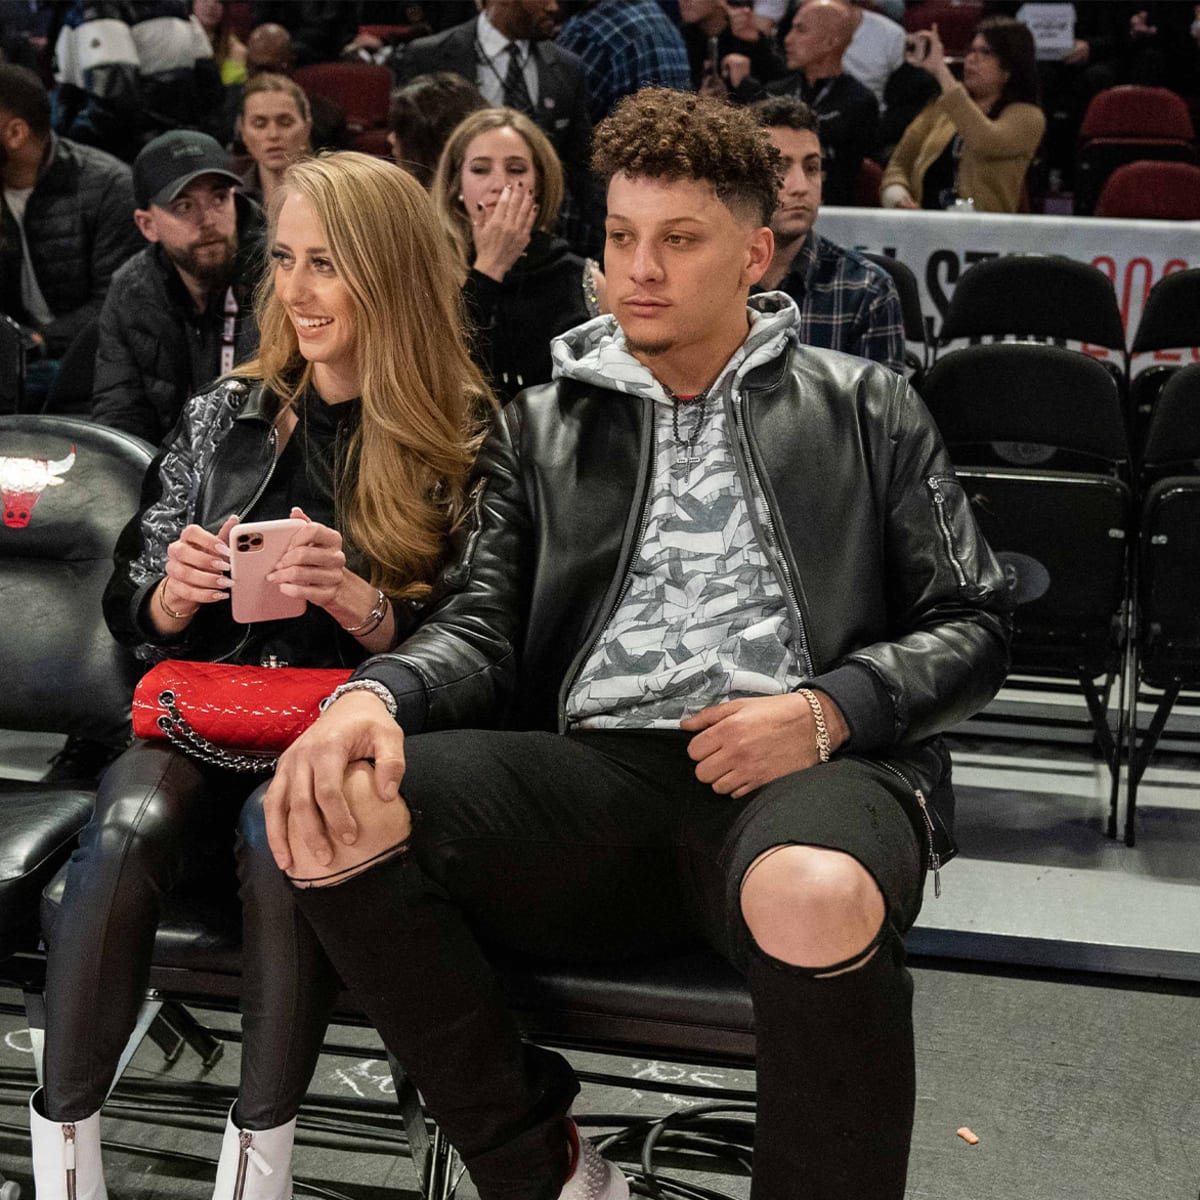 Patrick Mahomes's fiancé, Brittany Matthews, wishes she wouldn't get  'attacked' - Sports Illustrated